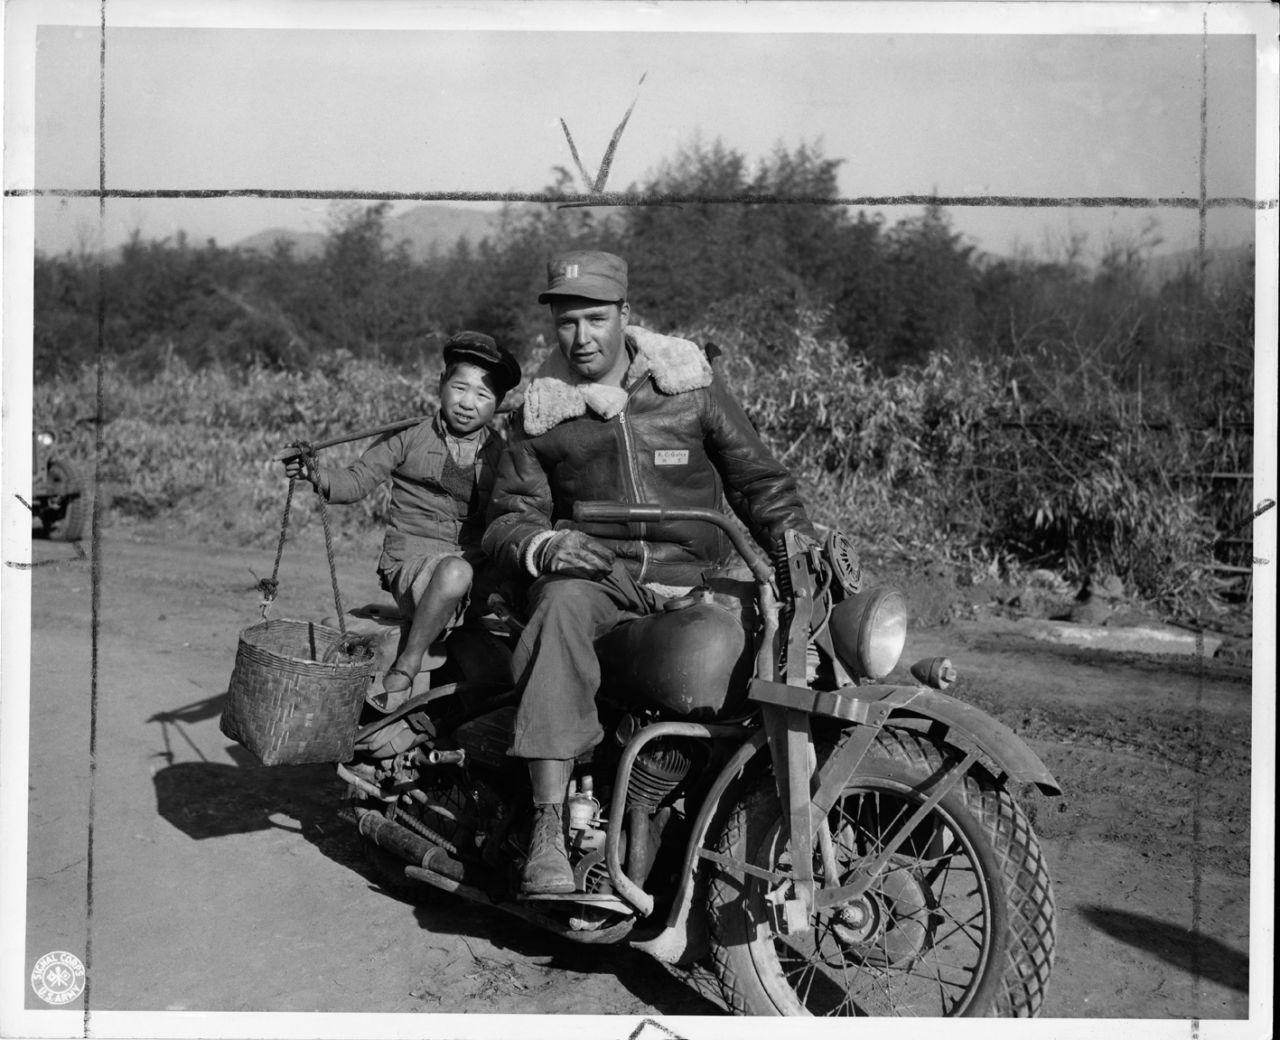 But acknowledging these realities does not mean denying that China's contributions were also very important to the war effort, Mitter adds.  Here, a convoy rider gives a Chinese child a ride in the Tengchun Cutoff, China. 